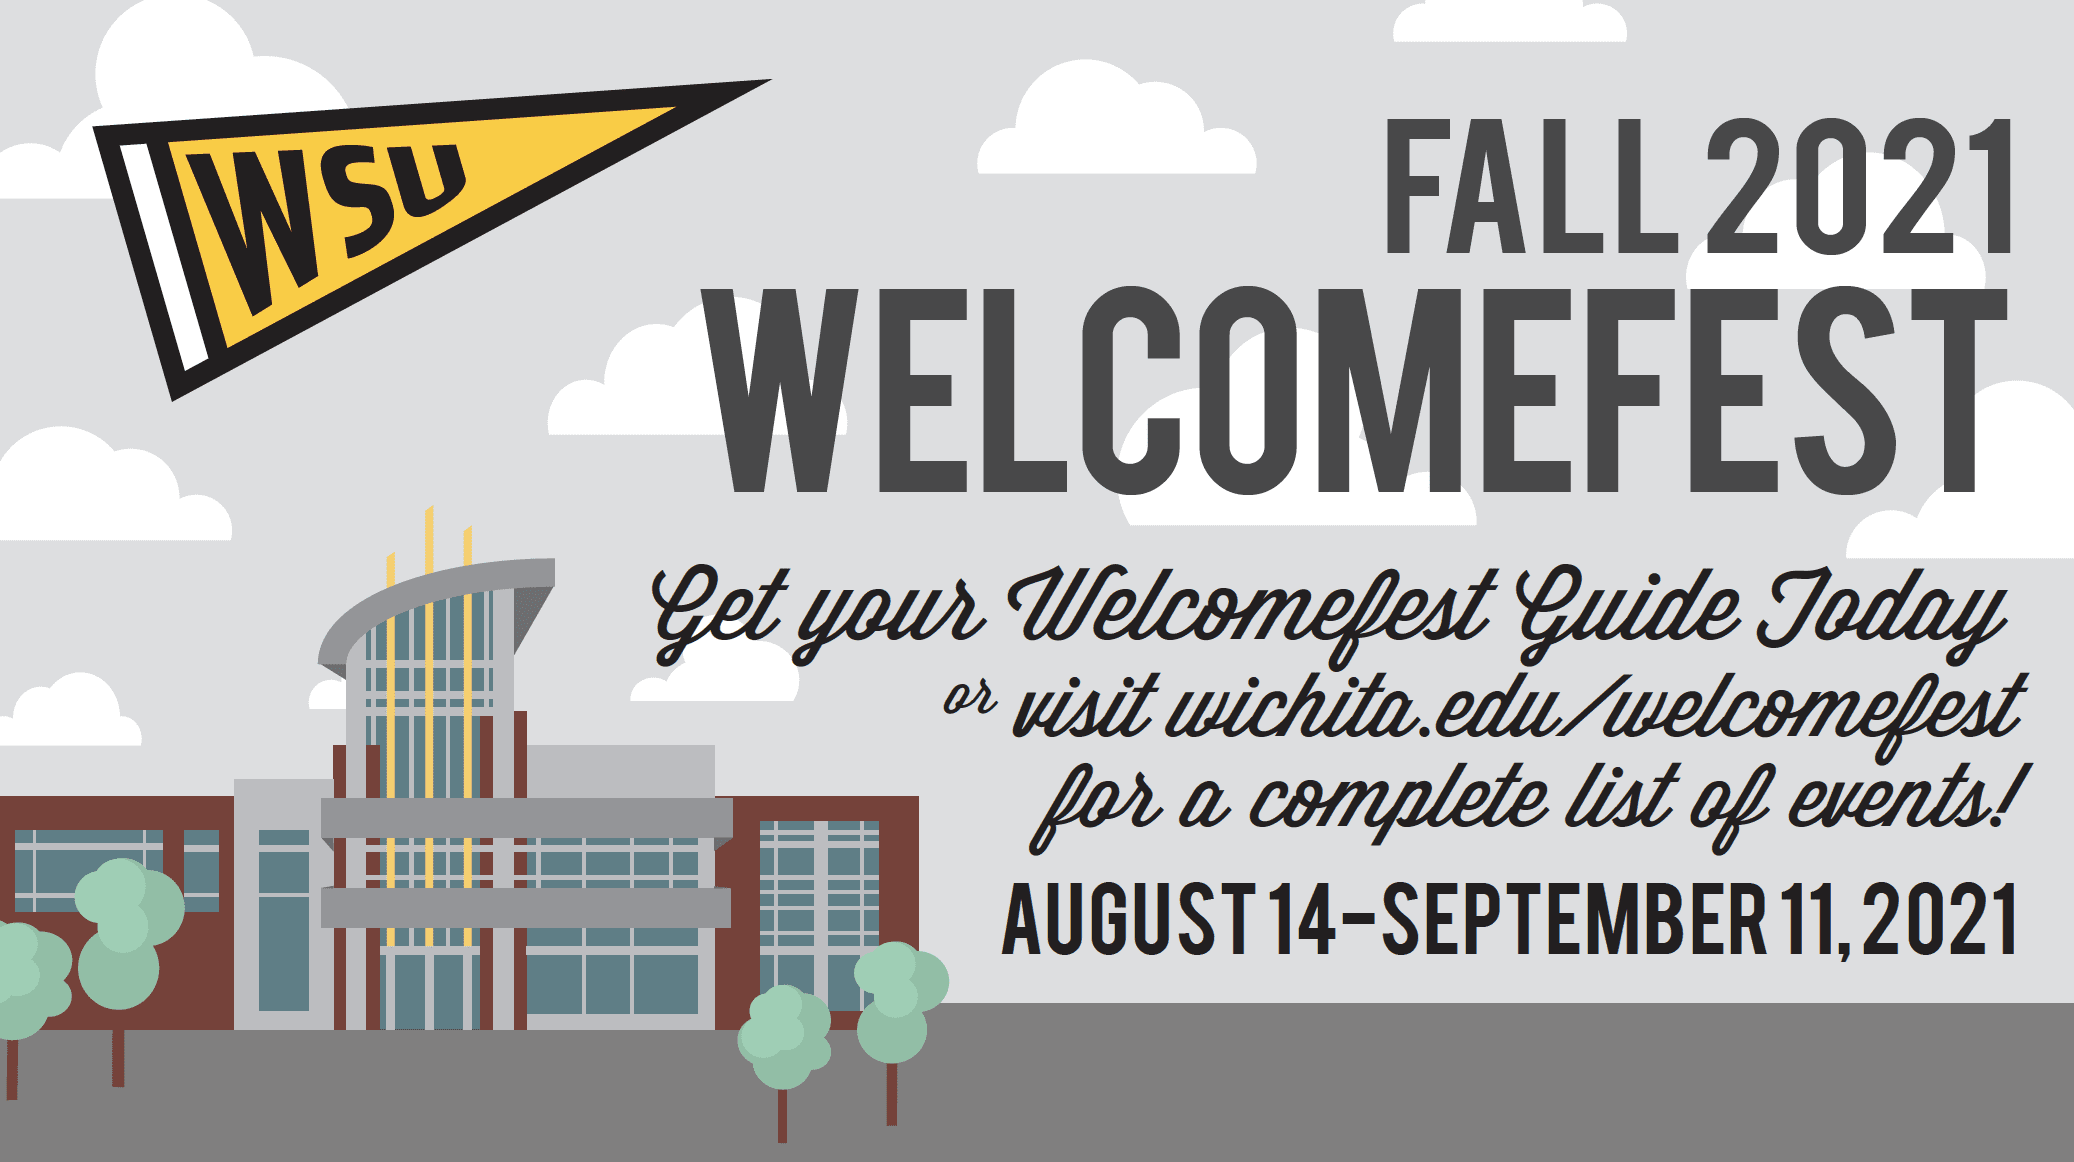 Fall 2021 Welcomefest - Get your Welcomefest Guide Today or visit wichita.edu/welcomefest for a complete list of events! August 14-September 11, 2021.